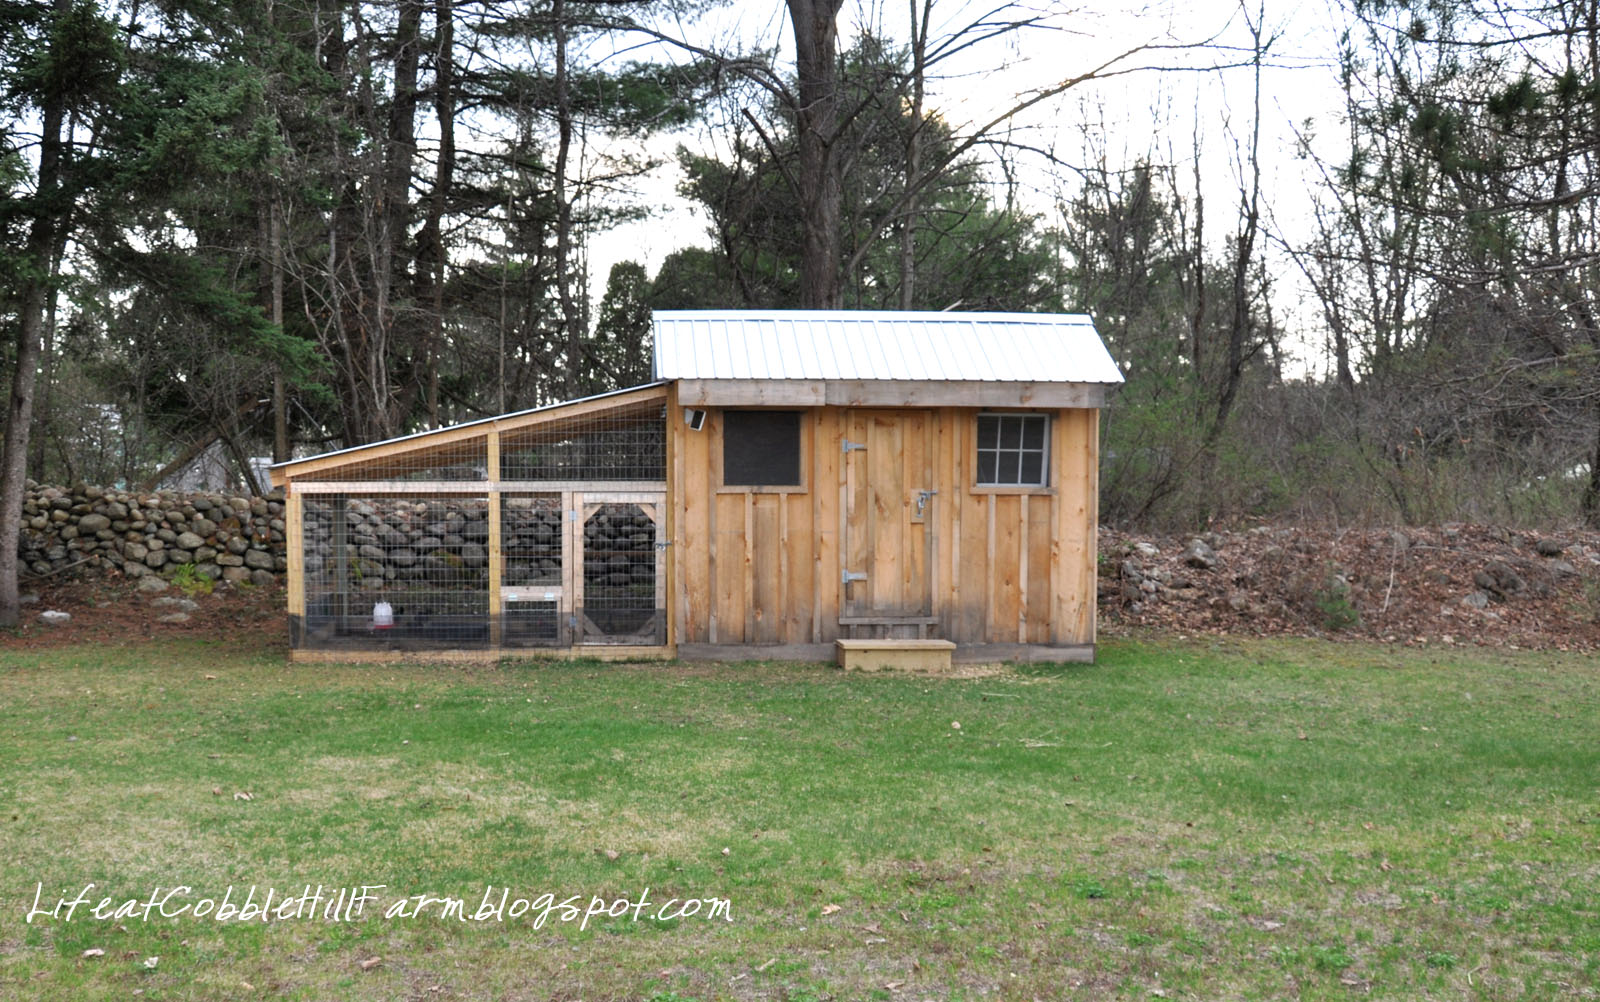 Life At Cobble Hill Farm: Chicken Coop 101: Thirteen Lessons Learned